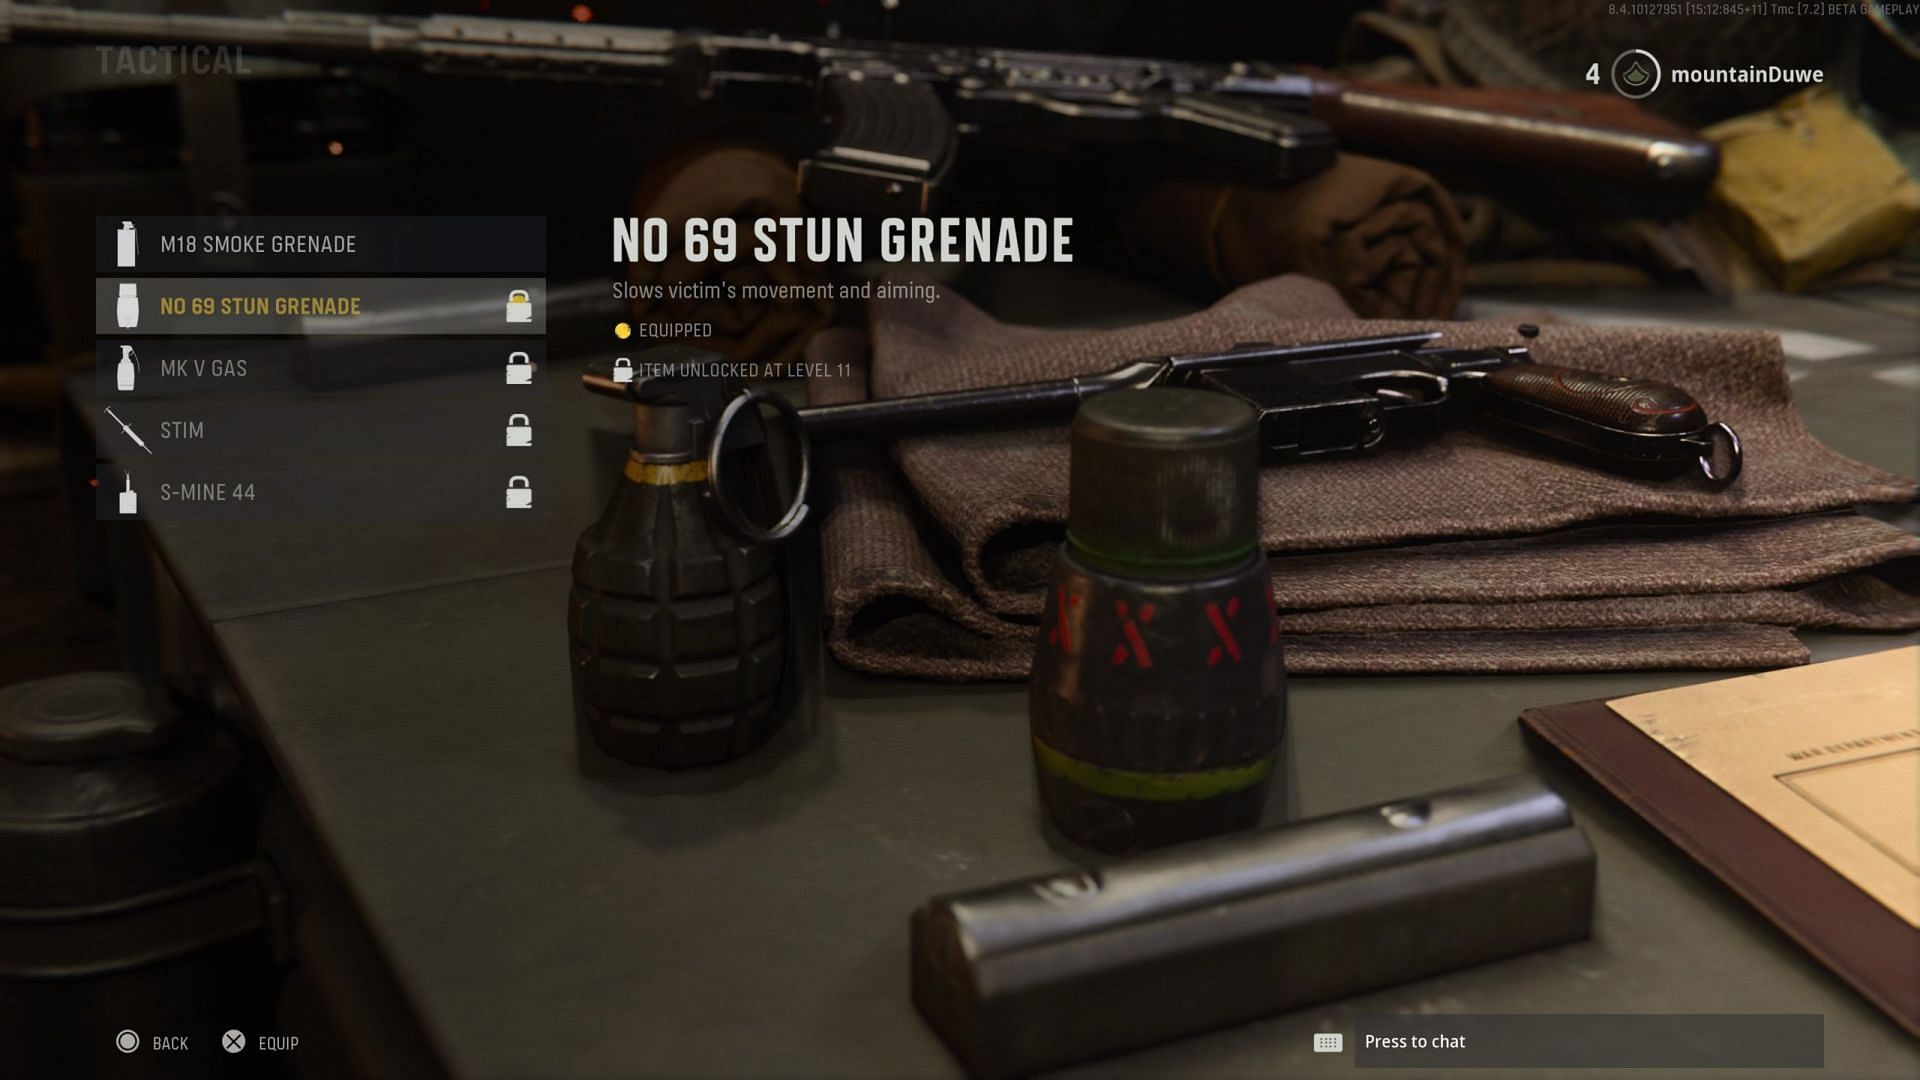 The Stun grenade in Call of Duty: Vanguard. (Image via Activision)